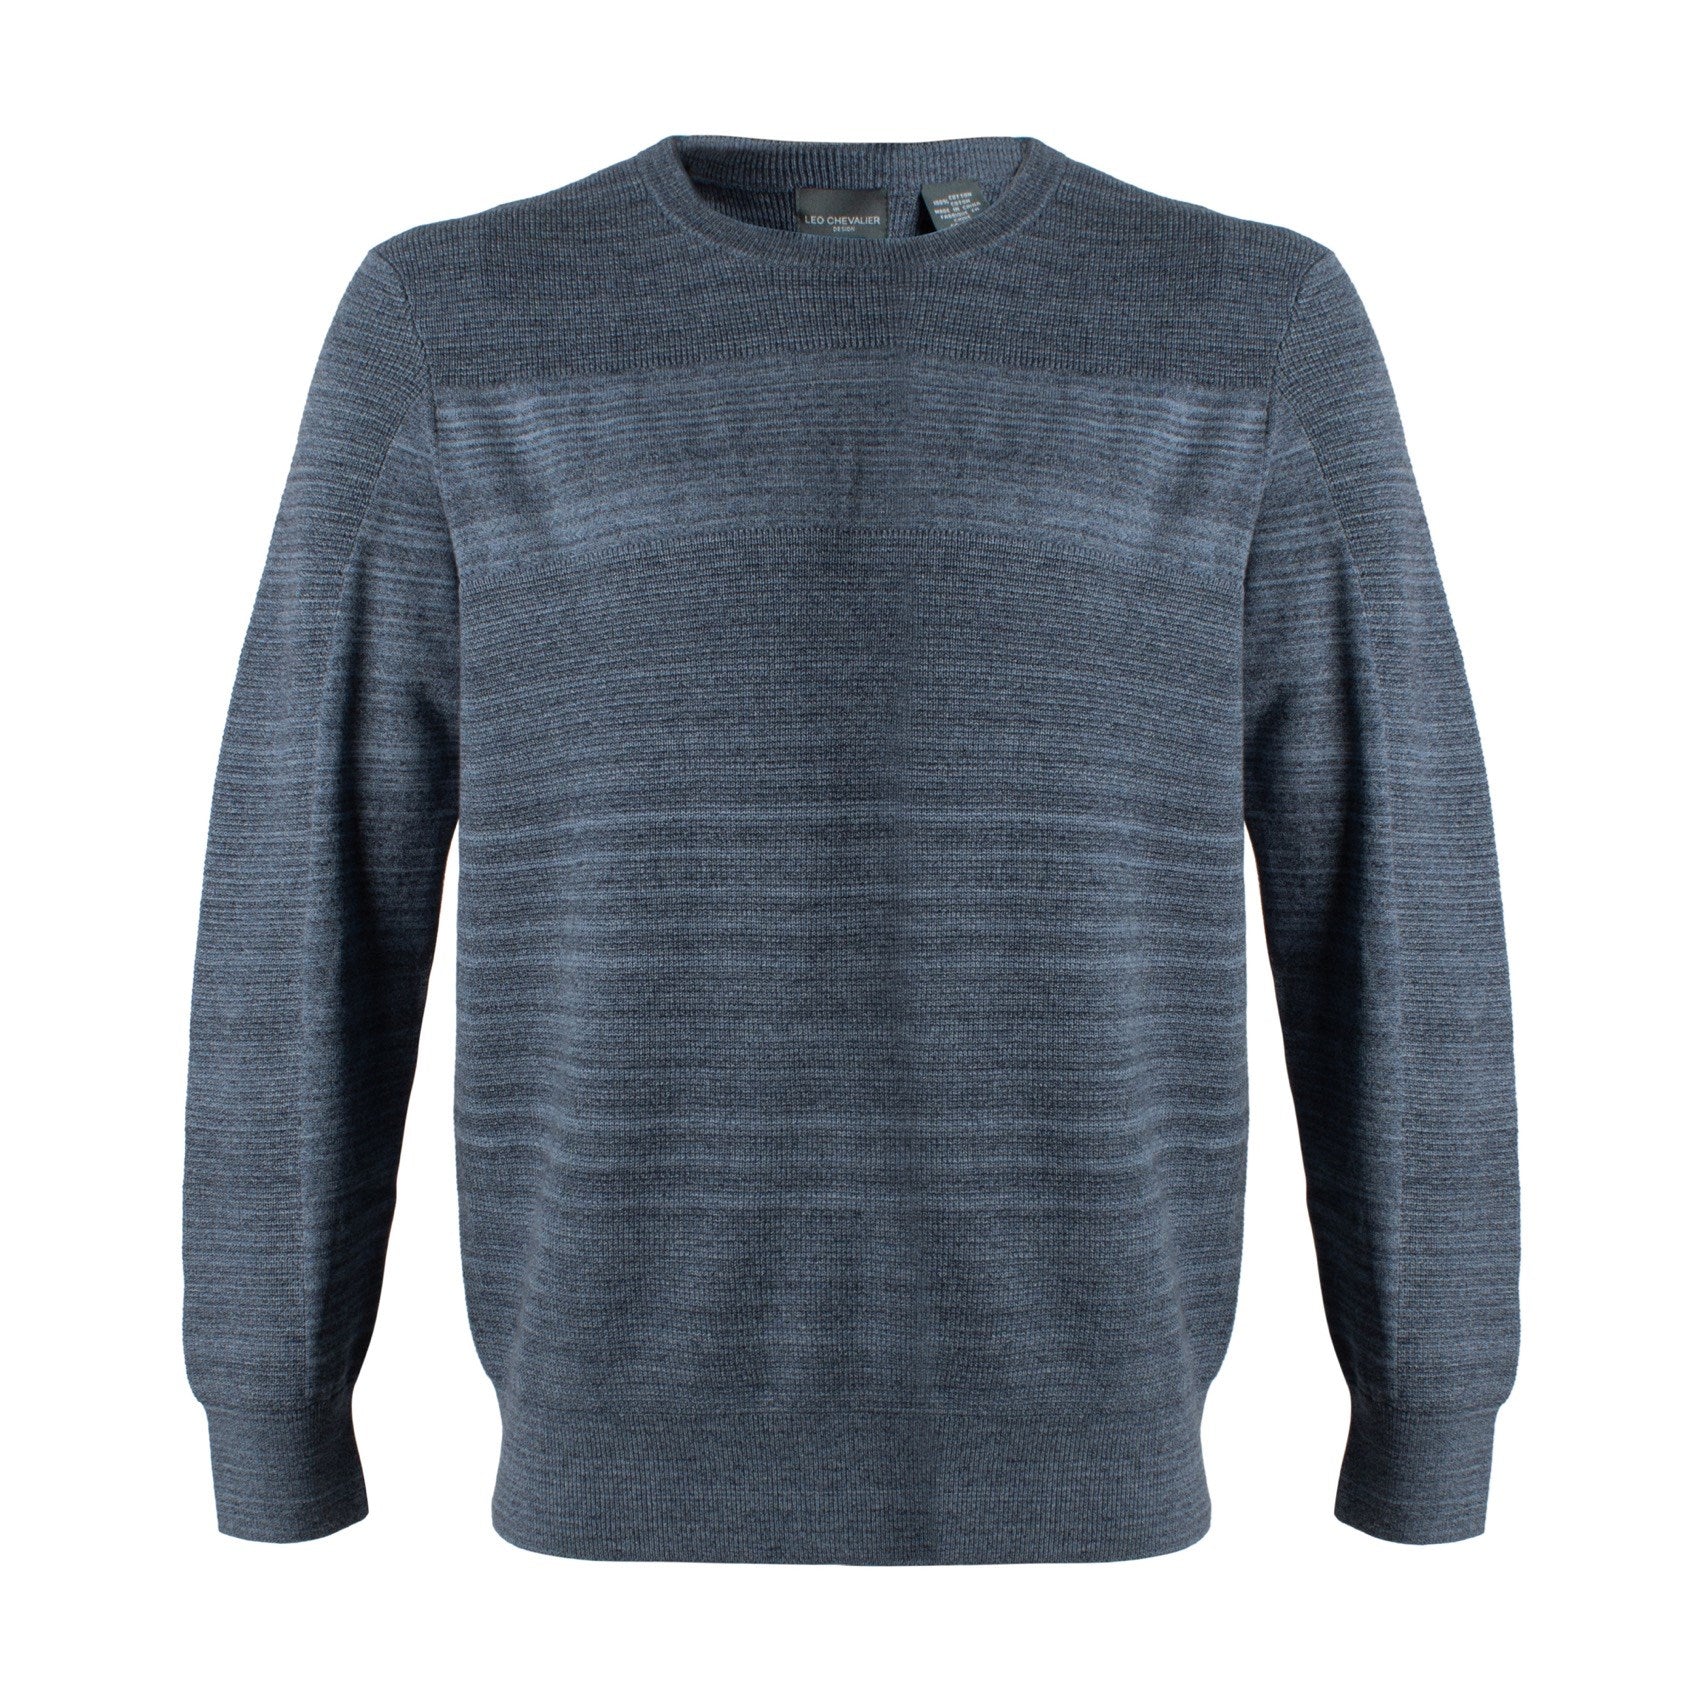 Space Dyed Cotton Crew Neck Sweater in Blue (Size Medium) by Leo Chevalier